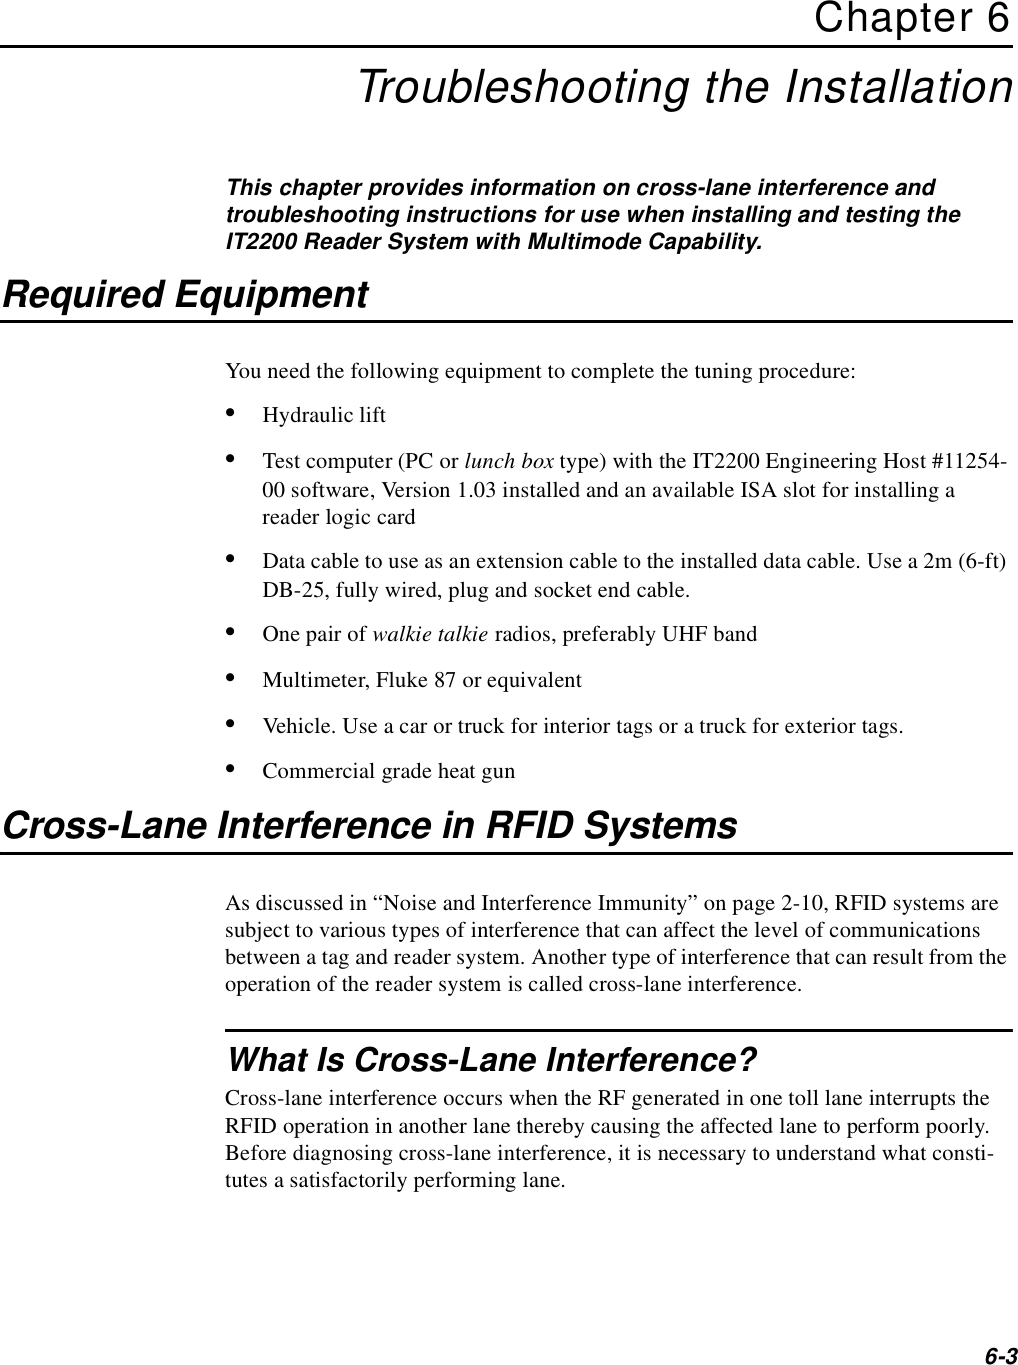 6-3Chapter 6Troubleshooting the InstallationThis chapter provides information on cross-lane interference and troubleshooting instructions for use when installing and testing the IT2200 Reader System with Multimode Capability.Required EquipmentYou need the following equipment to complete the tuning procedure:•Hydraulic lift•Test computer (PC or lunch box type) with the IT2200 Engineering Host #11254-00 software, Version 1.03 installed and an available ISA slot for installing a reader logic card•Data cable to use as an extension cable to the installed data cable. Use a 2m (6-ft) DB-25, fully wired, plug and socket end cable.•One pair of walkie talkie radios, preferably UHF band•Multimeter, Fluke 87 or equivalent•Vehicle. Use a car or truck for interior tags or a truck for exterior tags.•Commercial grade heat gunCross-Lane Interference in RFID SystemsAs discussed in “Noise and Interference Immunity” on page 2-10, RFID systems are subject to various types of interference that can affect the level of communications between a tag and reader system. Another type of interference that can result from the operation of the reader system is called cross-lane interference.What Is Cross-Lane Interference?Cross-lane interference occurs when the RF generated in one toll lane interrupts the RFID operation in another lane thereby causing the affected lane to perform poorly. Before diagnosing cross-lane interference, it is necessary to understand what consti-tutes a satisfactorily performing lane.